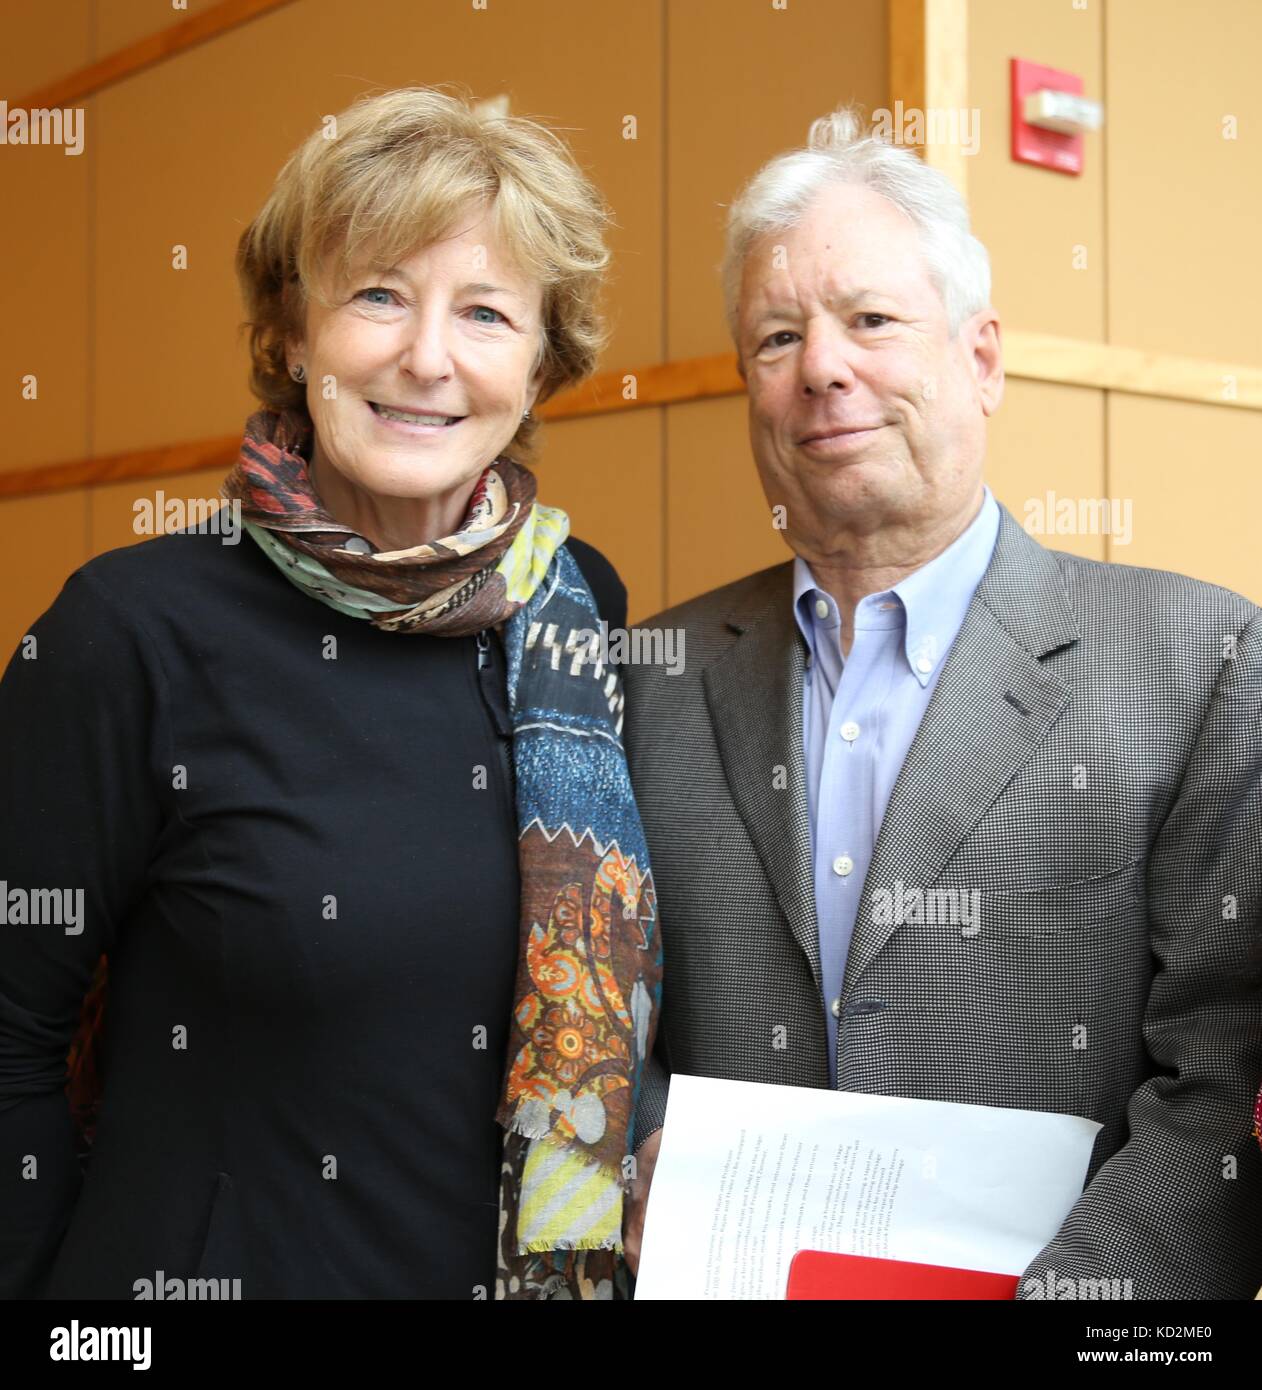 Chicago, USA. 9th Oct, 2017. Richard H. Thaler (R), 2017 Nobel Prize winner in Economics, poses for photos with his wife during a press conference at University of Chicago Booth School of Business in Chicago, the United States, on Oct. 9, 2017. The 2017 Nobel Prize in Economics was awarded to Richard H. Thaler 'for his contributions to behavioural economics,' announced the Royal Swedish Academy of Sciences on Monday. Credit: Wang Qiang/Xinhua/Alamy Live News Stock Photo